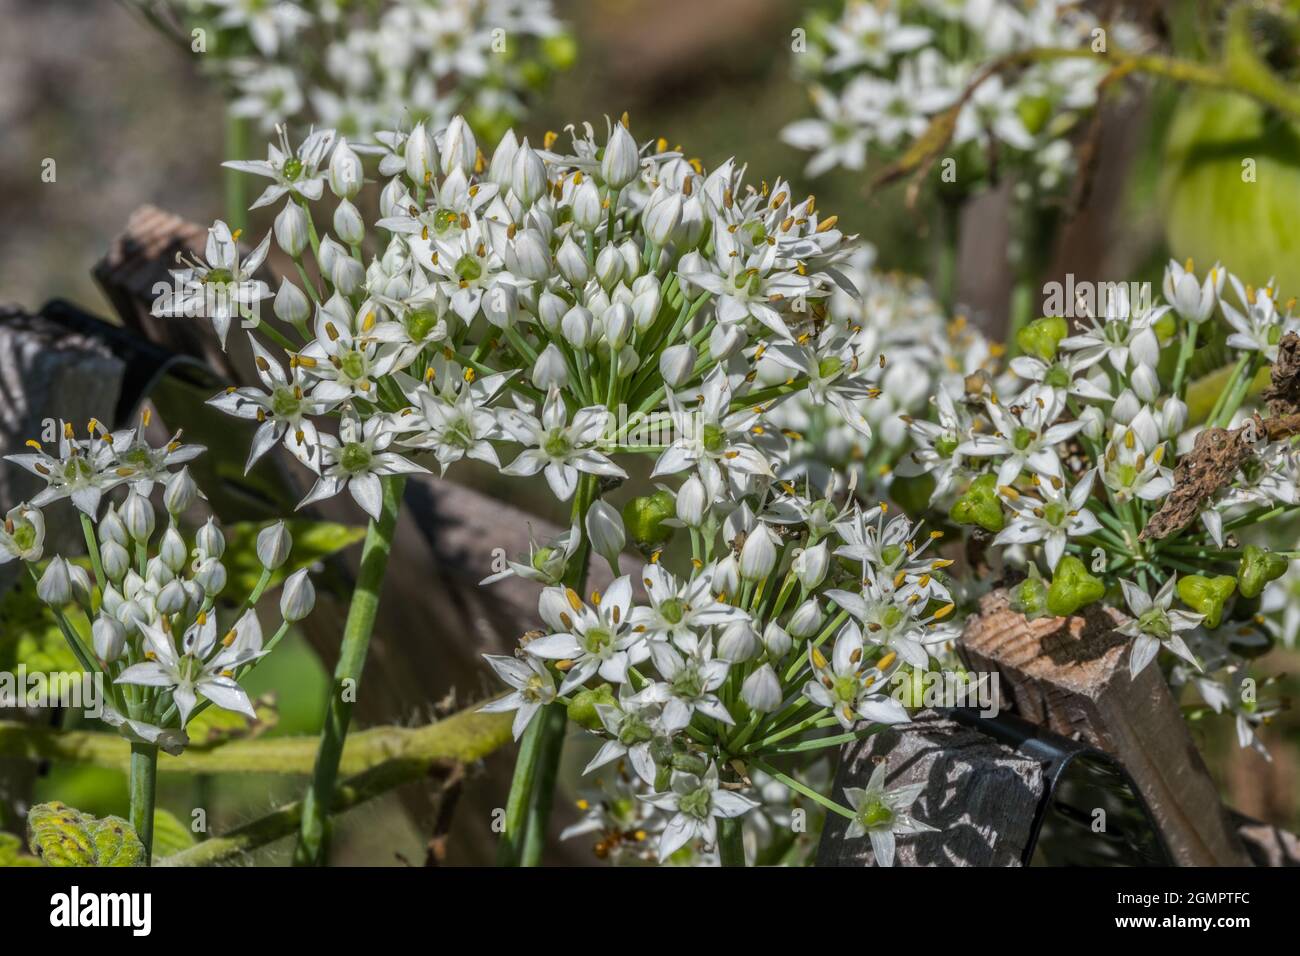 white allium plant also called a ornamental onion with little flowers opening up clustered together growing in a garden closeup Stock Photo